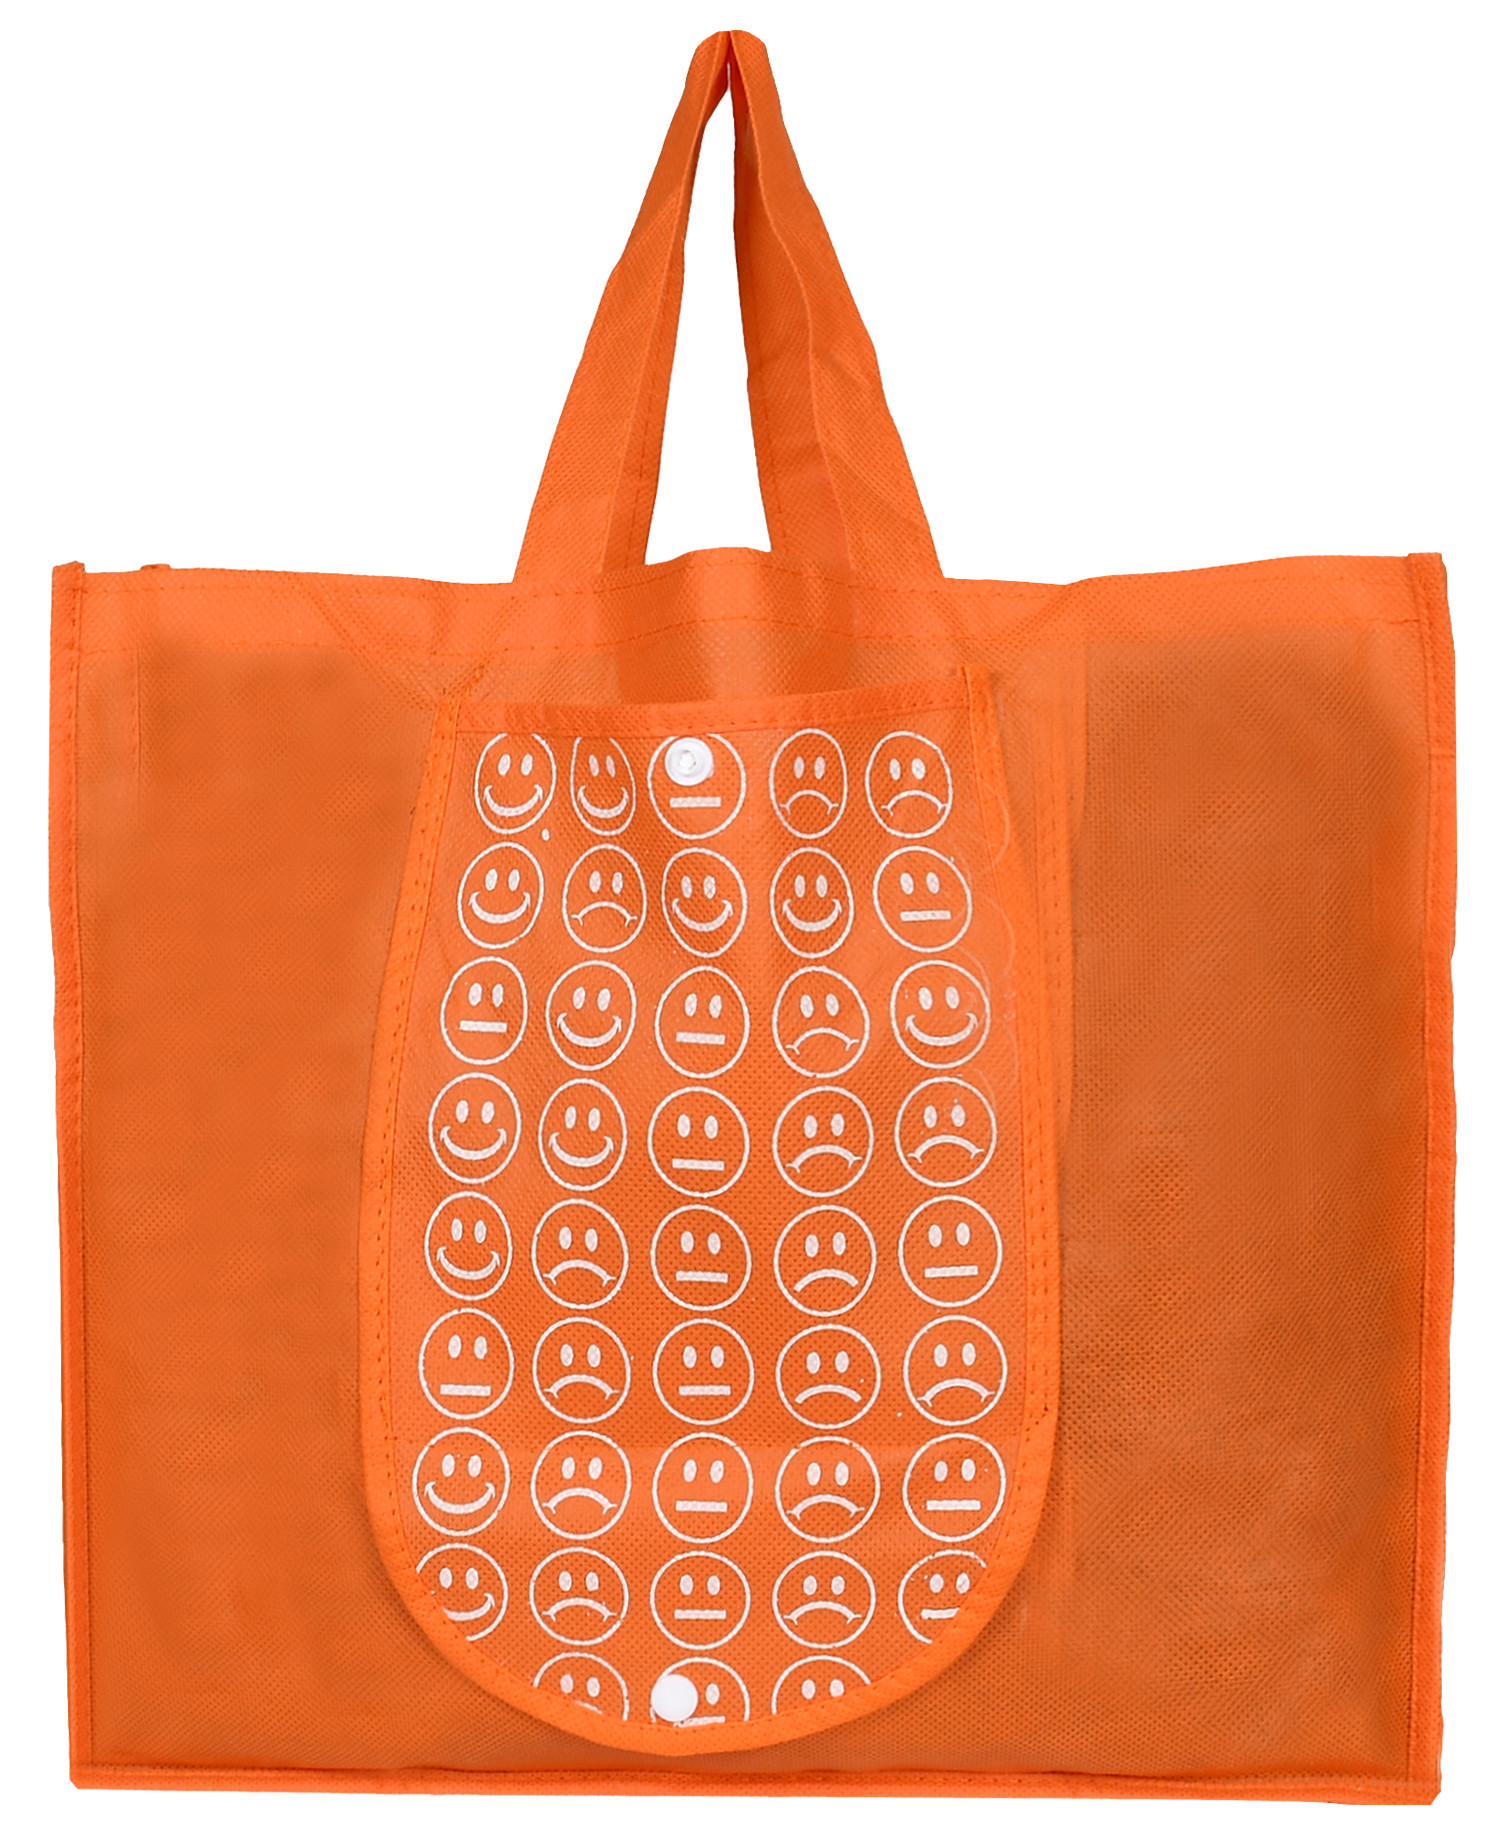 Kuber Industries Shopping Grocery Bags Foldable, Washable Grocery Tote Bag with One Small Pocket, Eco-Friendly Purse Bag Fits in Pocket Waterproof & Lightweight (Orange & Green & Red)